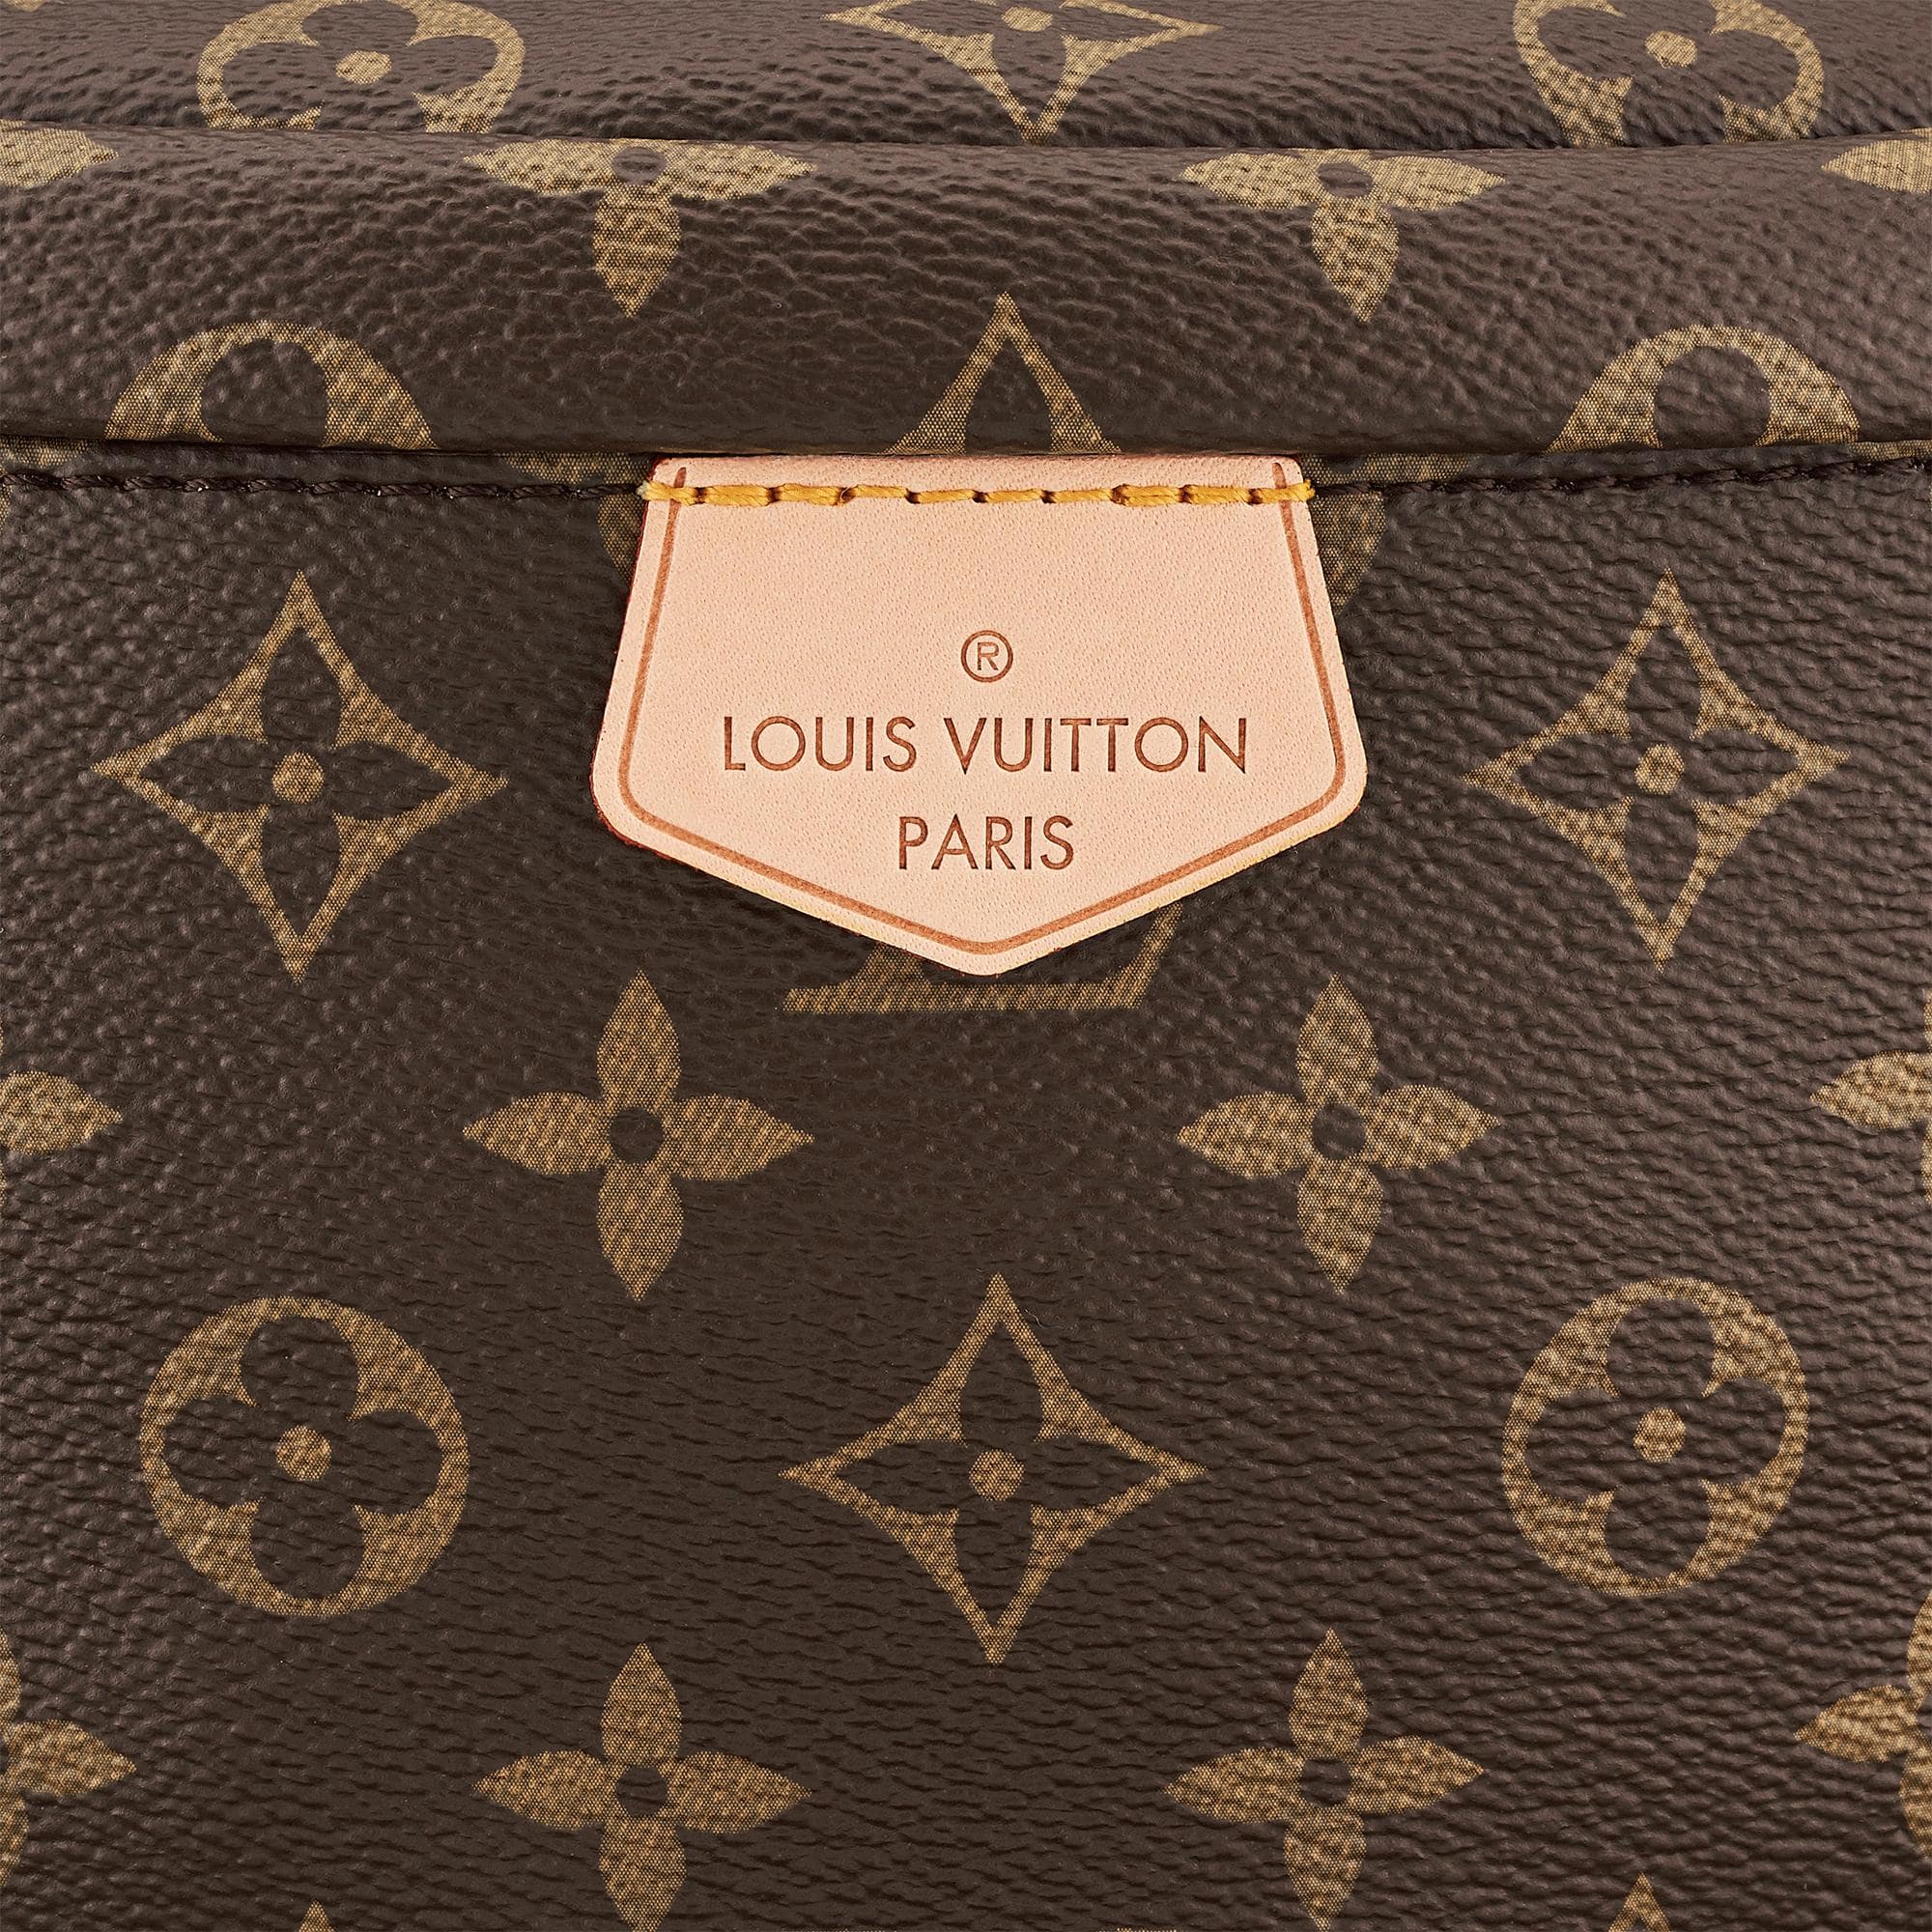 The story behind the brand: Louis Vuitton - BRAND MINDS